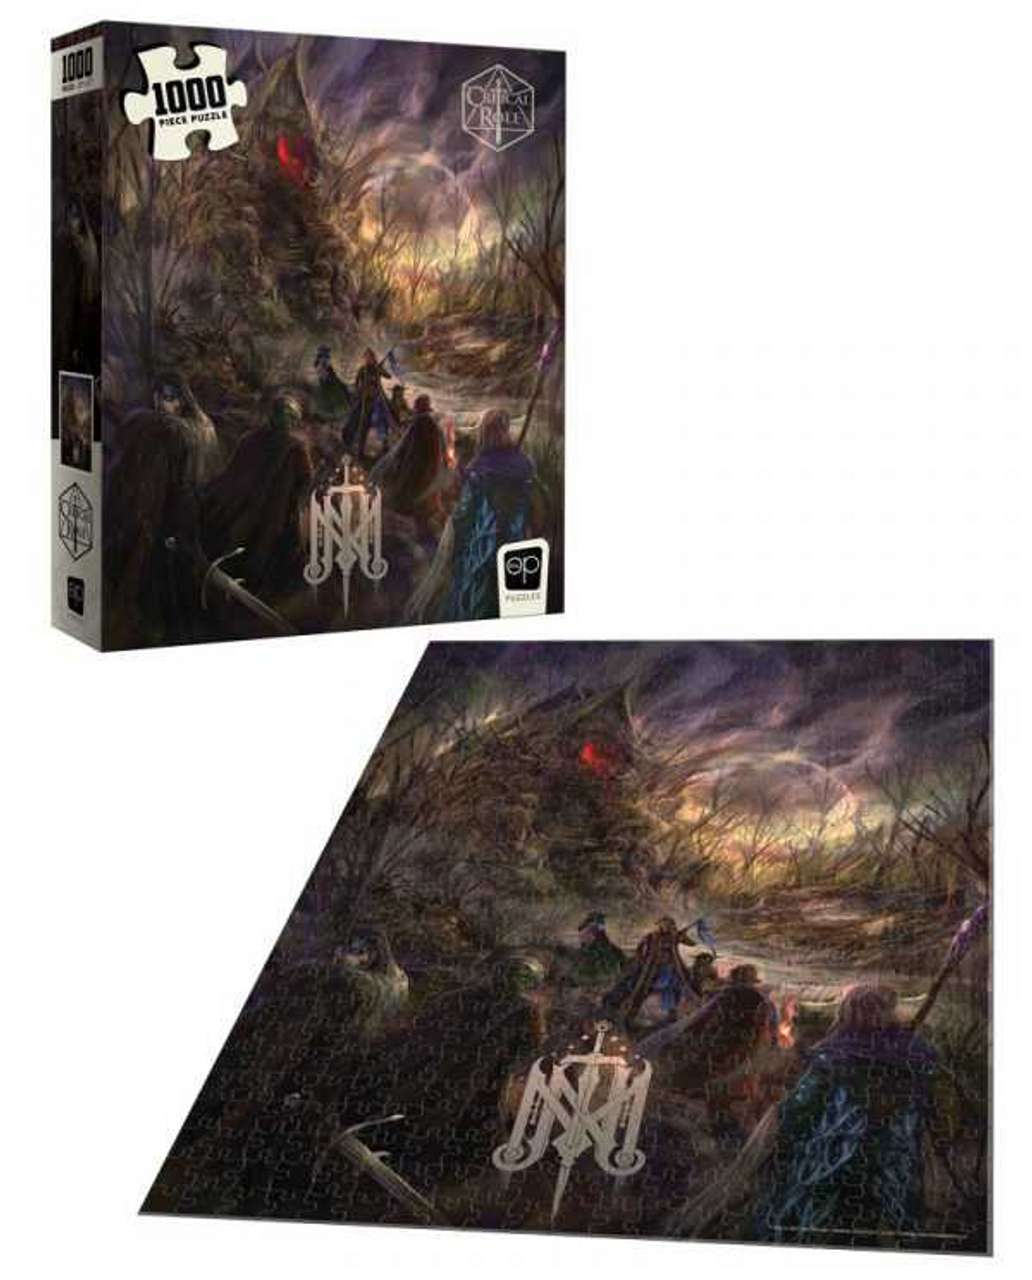 Critical Role: The Mighty Nein “Isharnai’s Hut” 1000 Piece Puzzle